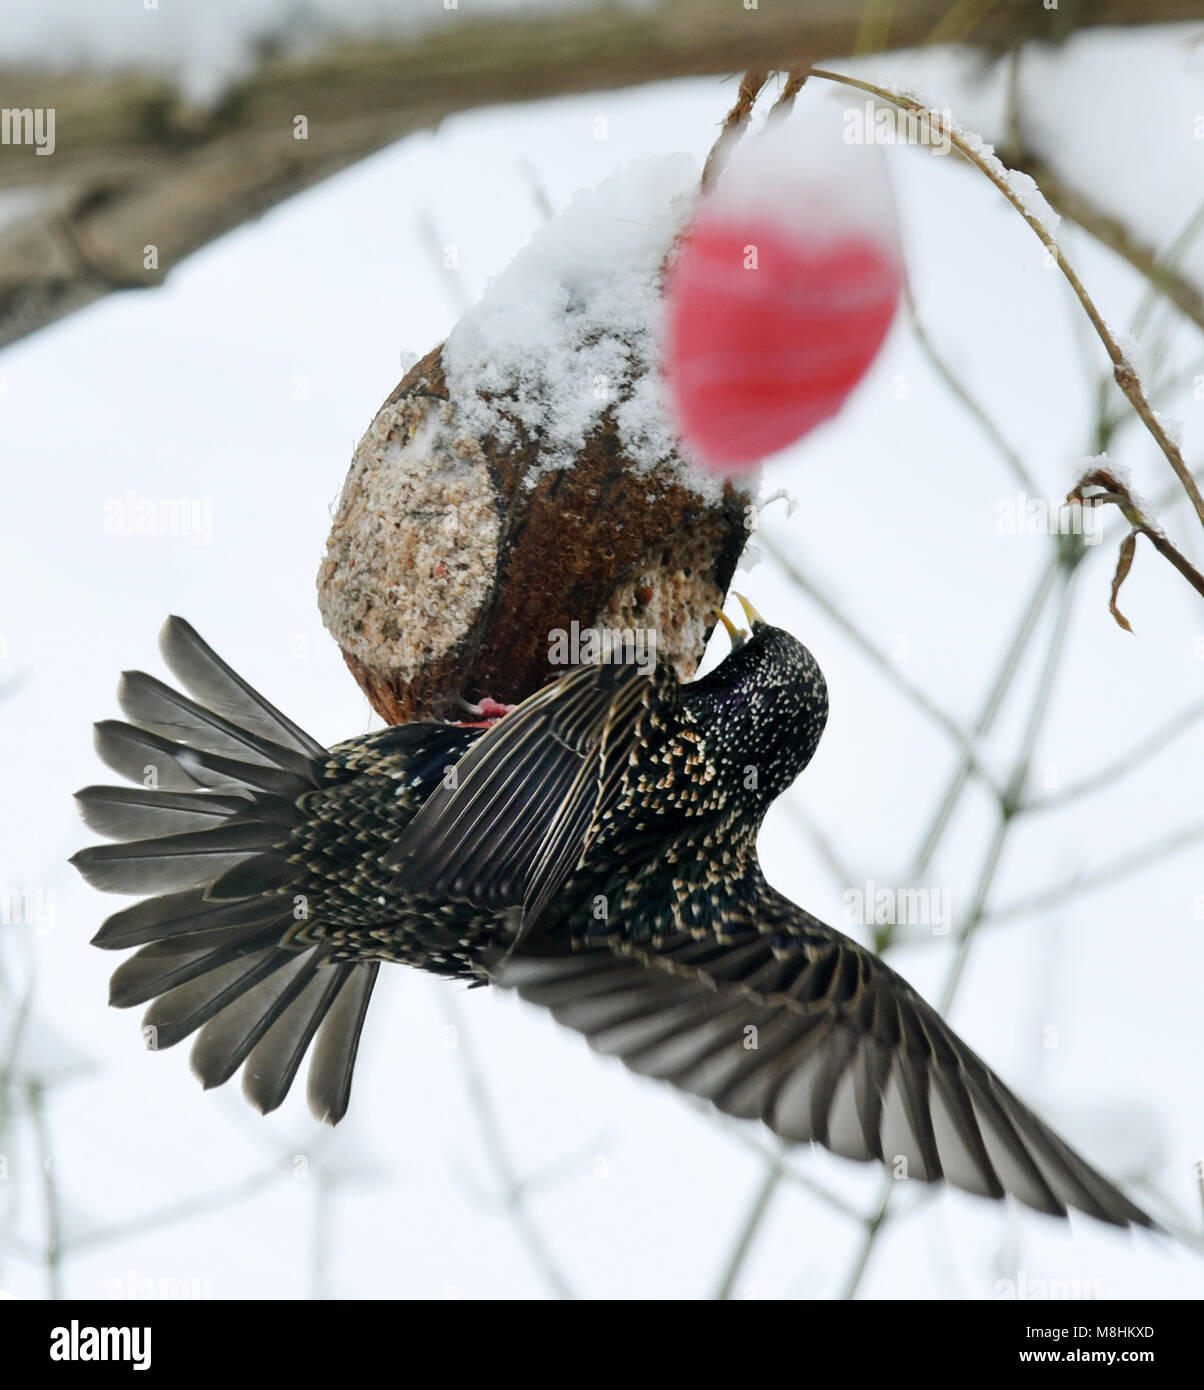 Leipzing, Germany, 17 Mar 2018.  A starling at a bird feeder. A snow-covered plastic Easter egg is visible in the foreground. Photo: Waltraud Grubitzsch/dpa-Zentralbild/dpa Stock Photo